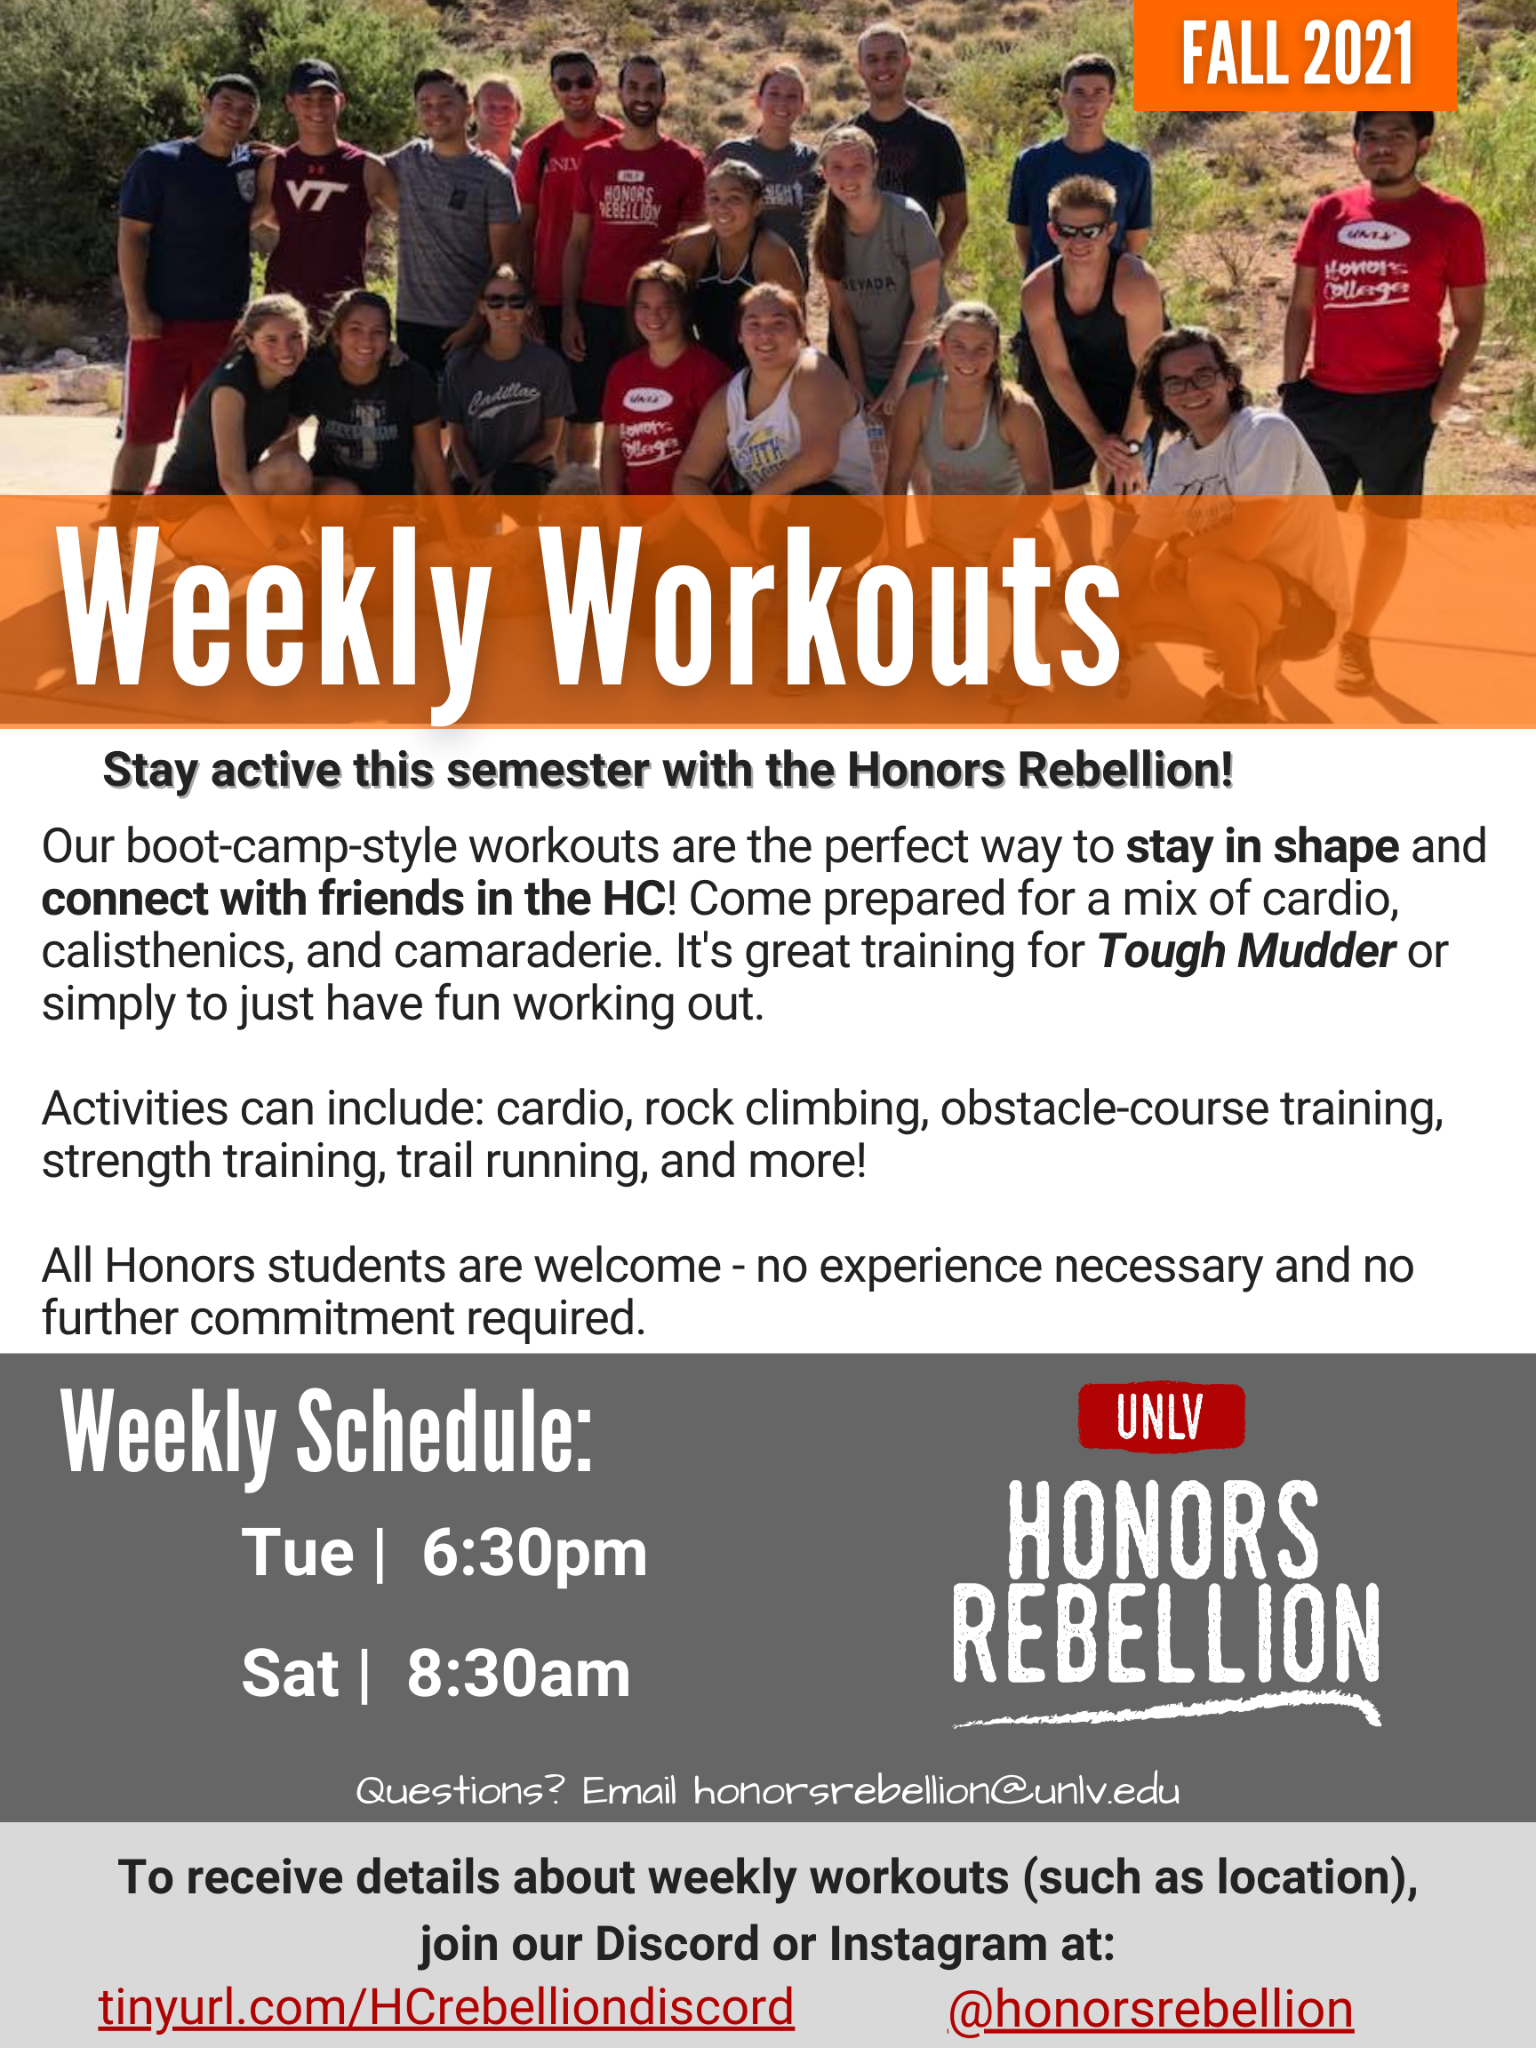 Weekly workouts with Honors rebellion